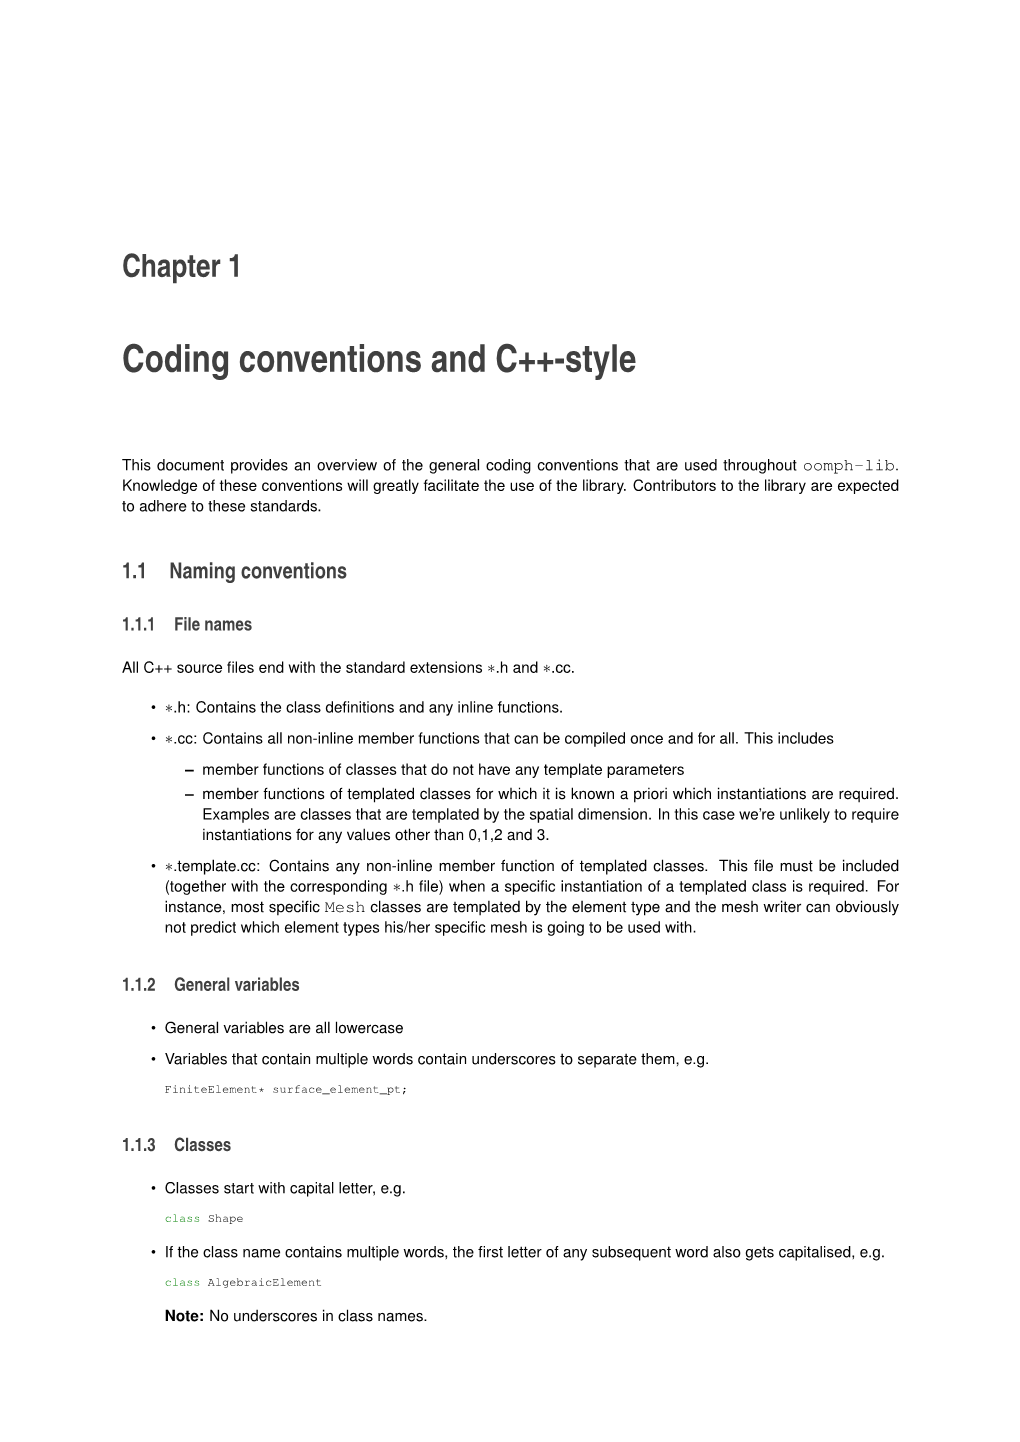 Coding Conventions and C++-Style